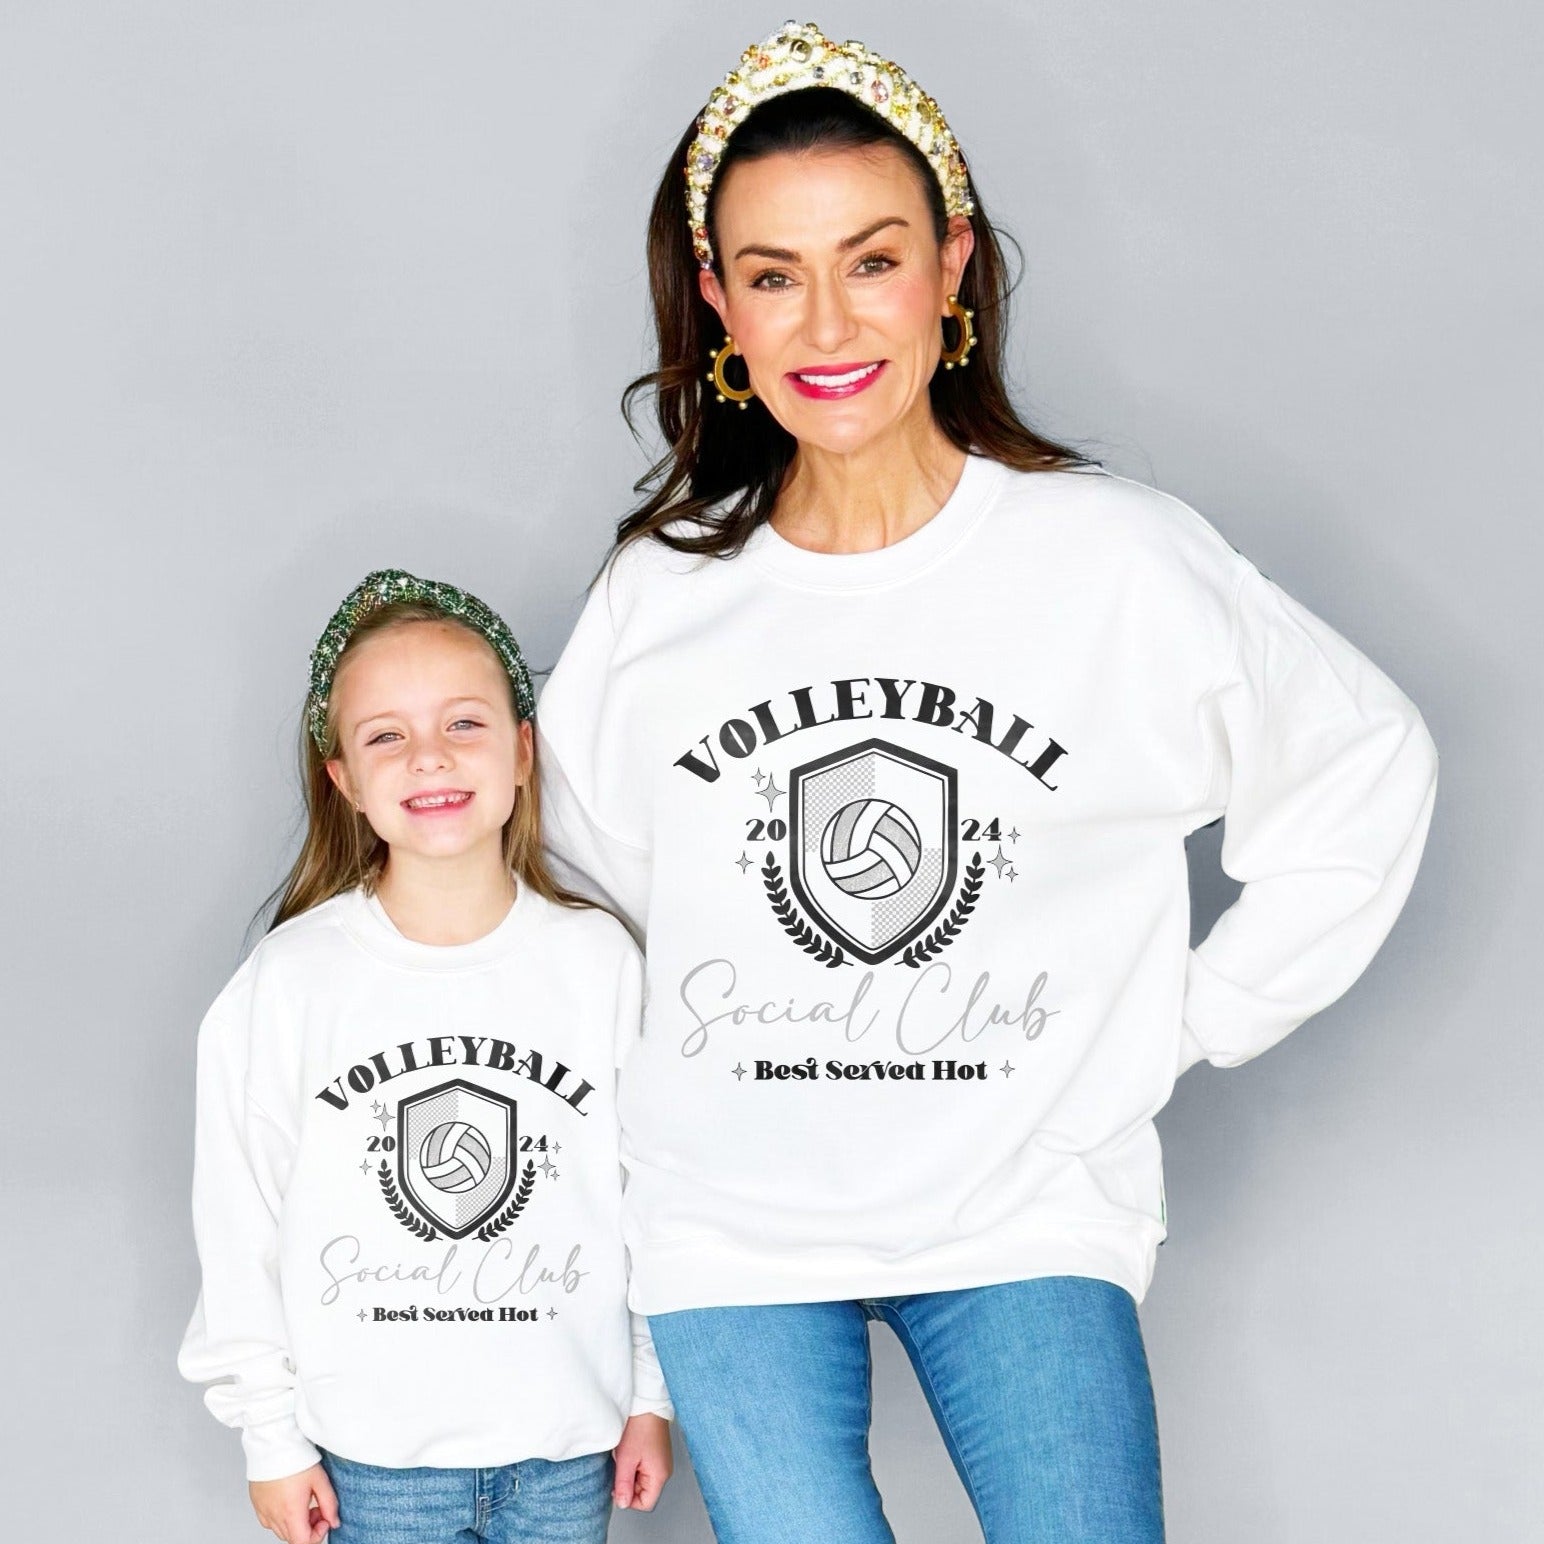 Volleyball Social Club Youth and Adult Sweatshirt